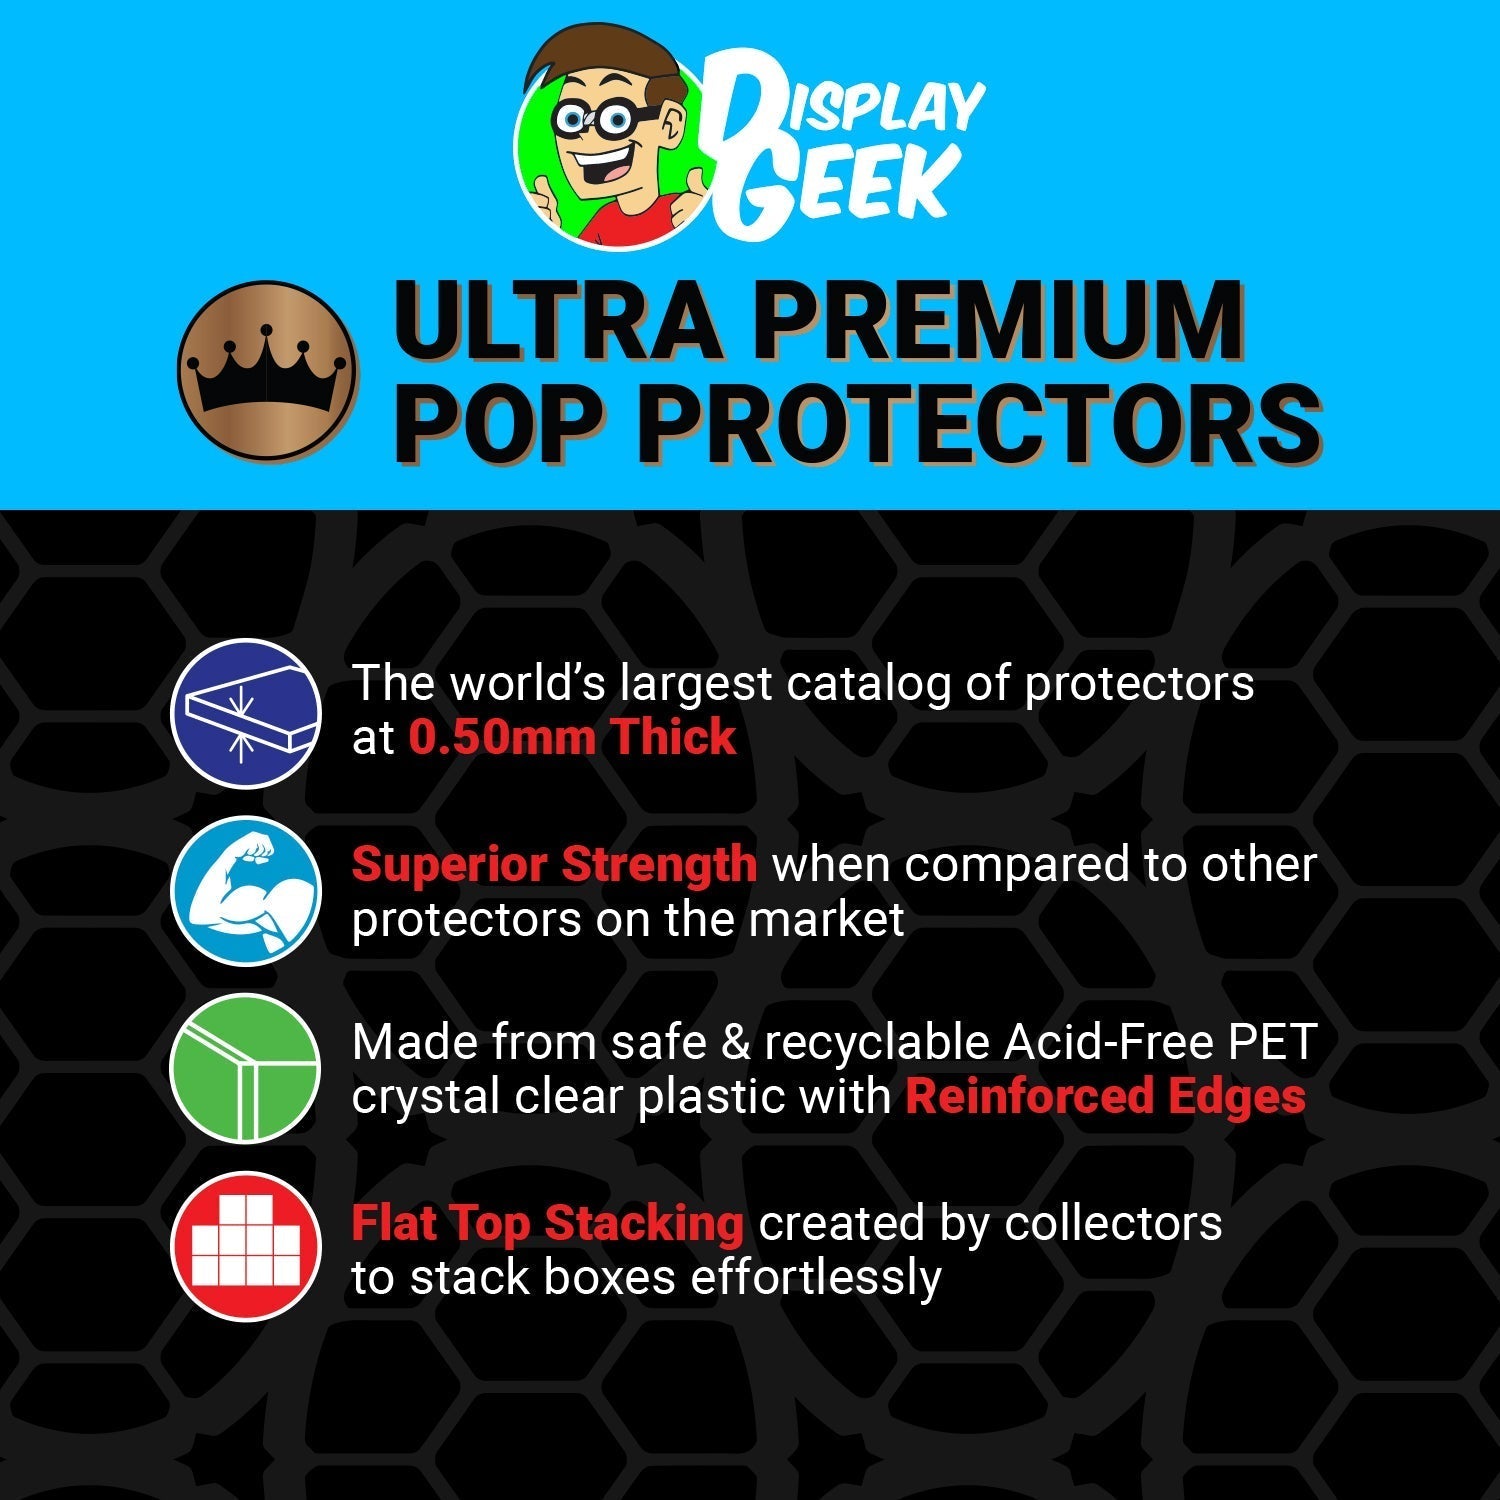 Pop Protector for 9 inch Giant Freddy Funko as Batman Brown Hair SDCC Funko Pop - PPG Pop Protector Guide Search Created by Display Geek